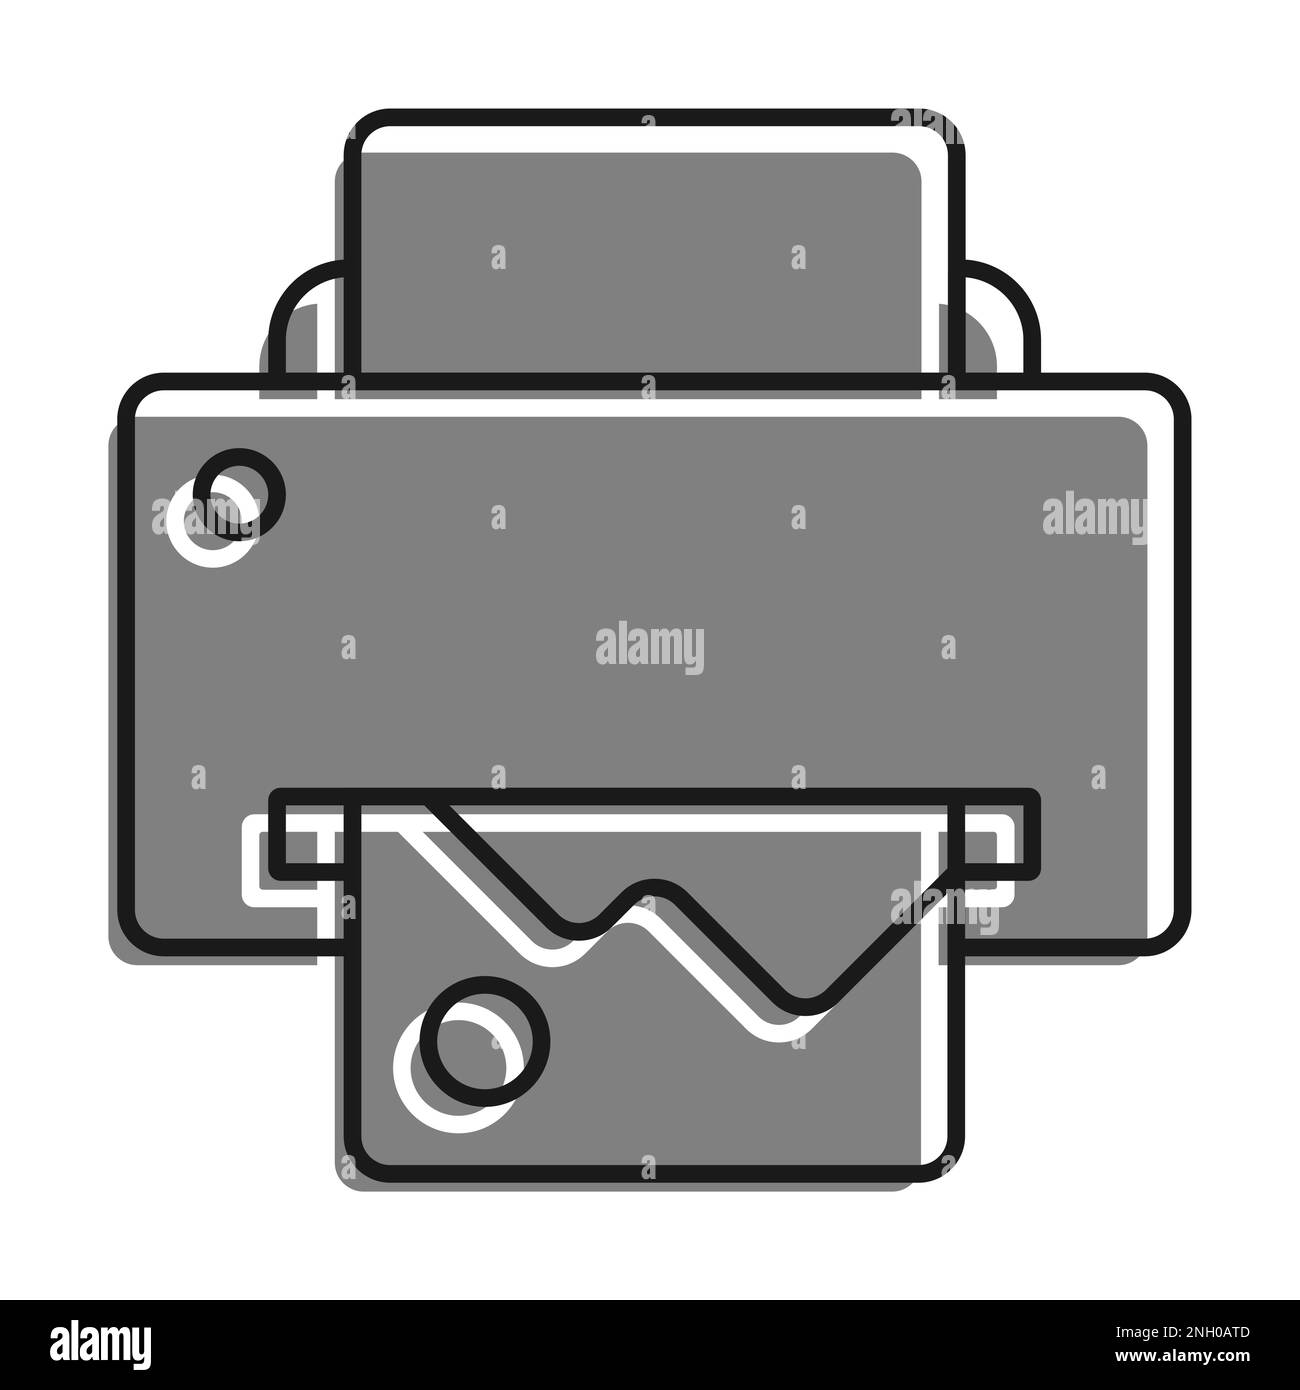 Linear filled with gray color icon. Inkjet Printer. Printing Documents In Office Using Copiers. Simple black and white vector On white background Stock Vector